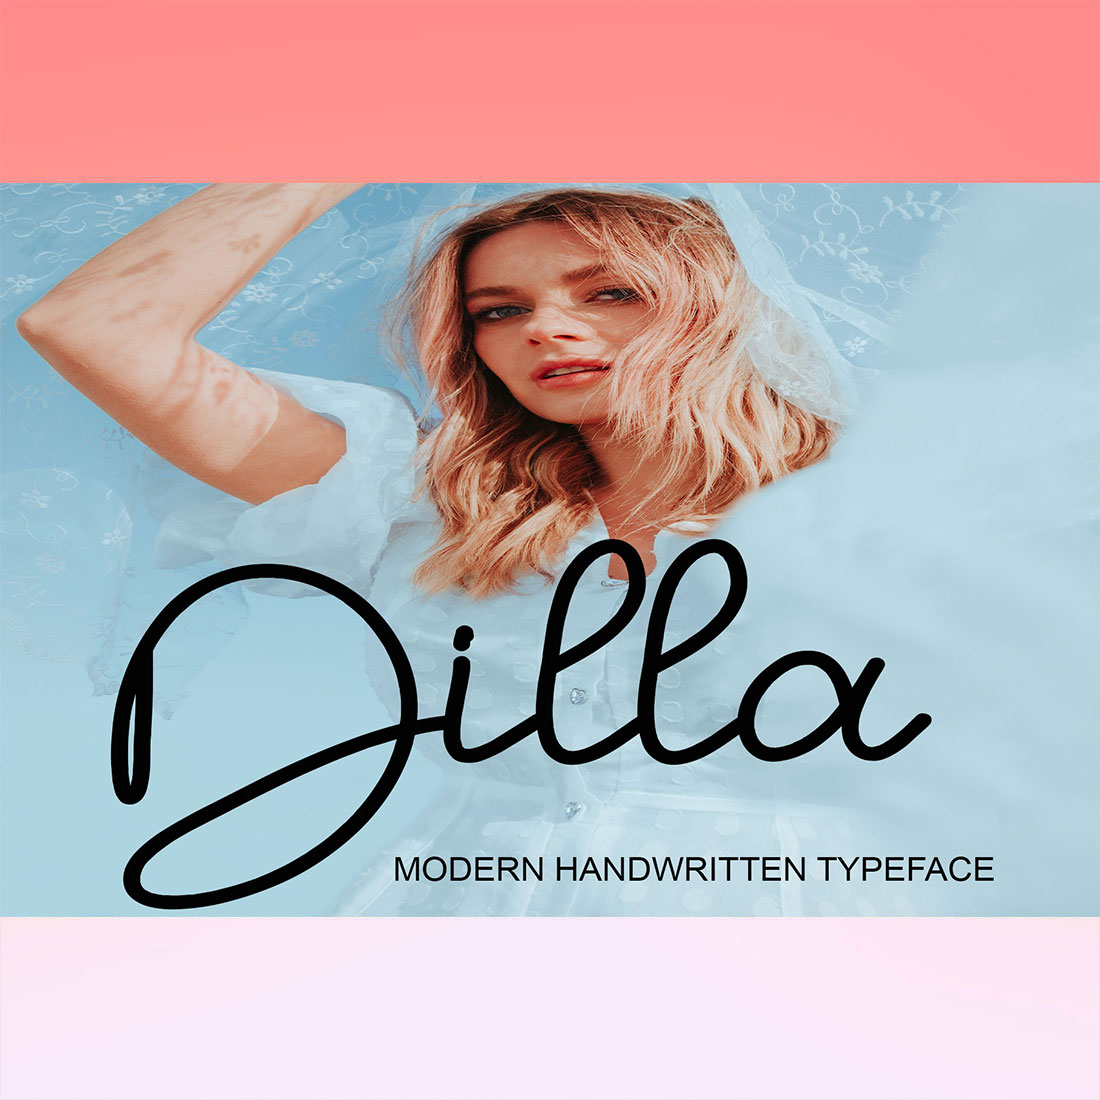 Dilla-only$5 cover image.